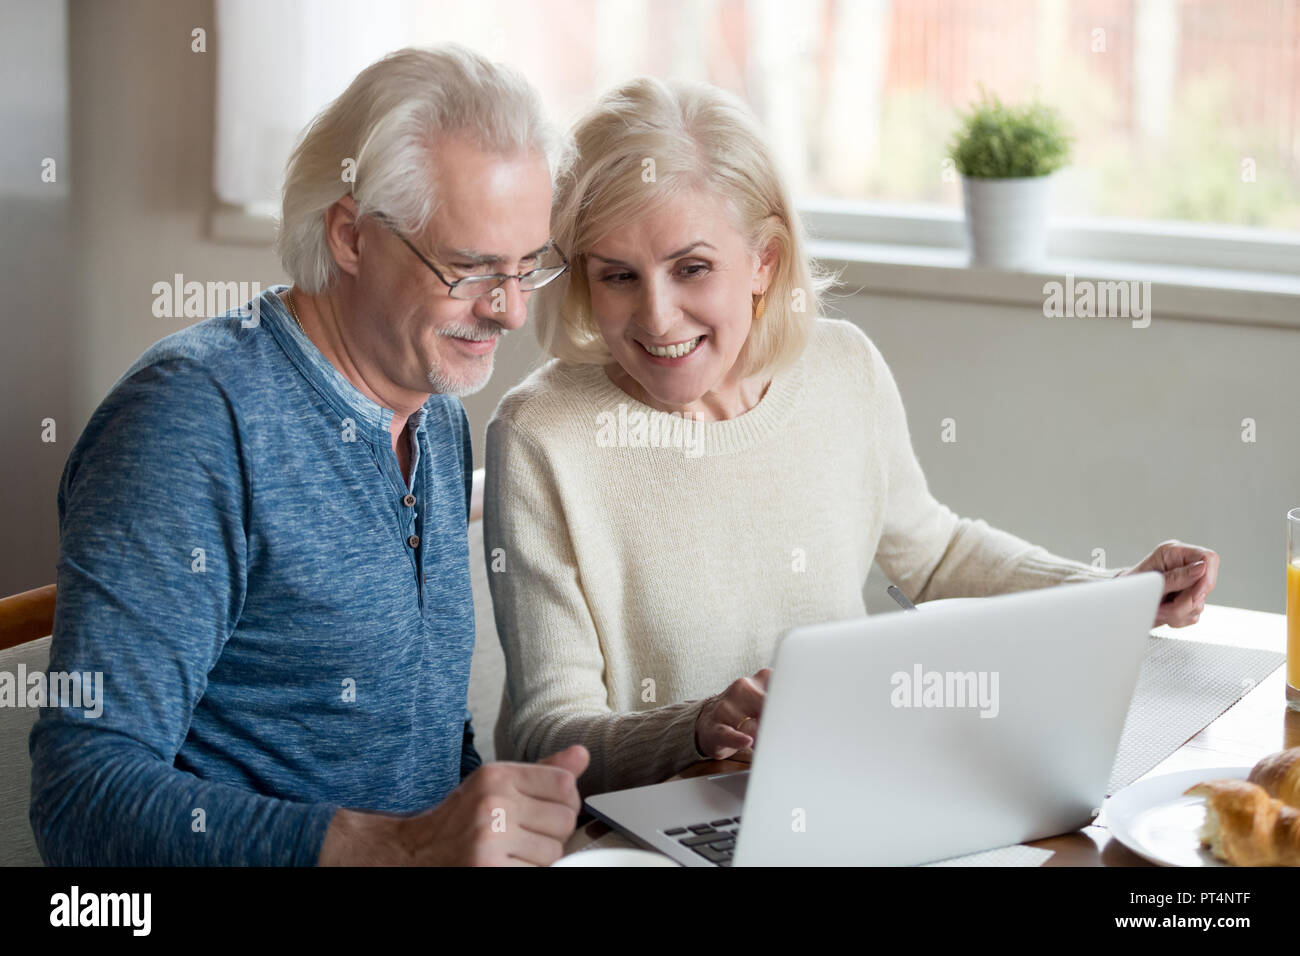 Happy old family couple talking using laptop having breakfast together, surprised excited senior woman looking at computer screen showing smiling midd Stock Photo